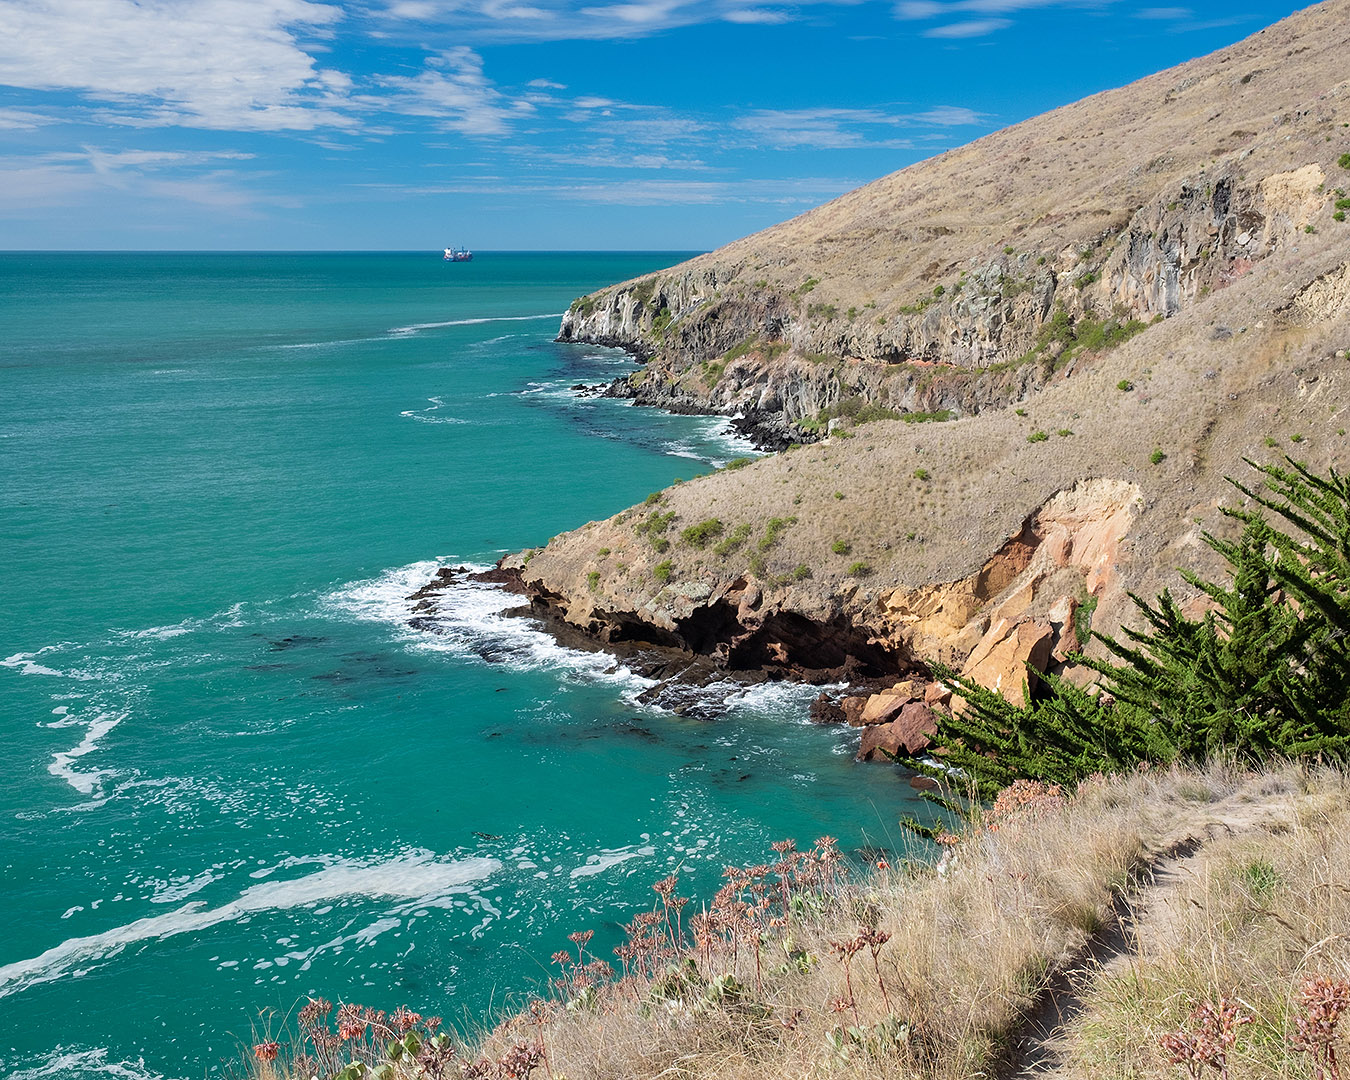 Part of the coastline near Taylors Mistake (or Te Onepoto) near Christchurch, on New Zealand's South Island.